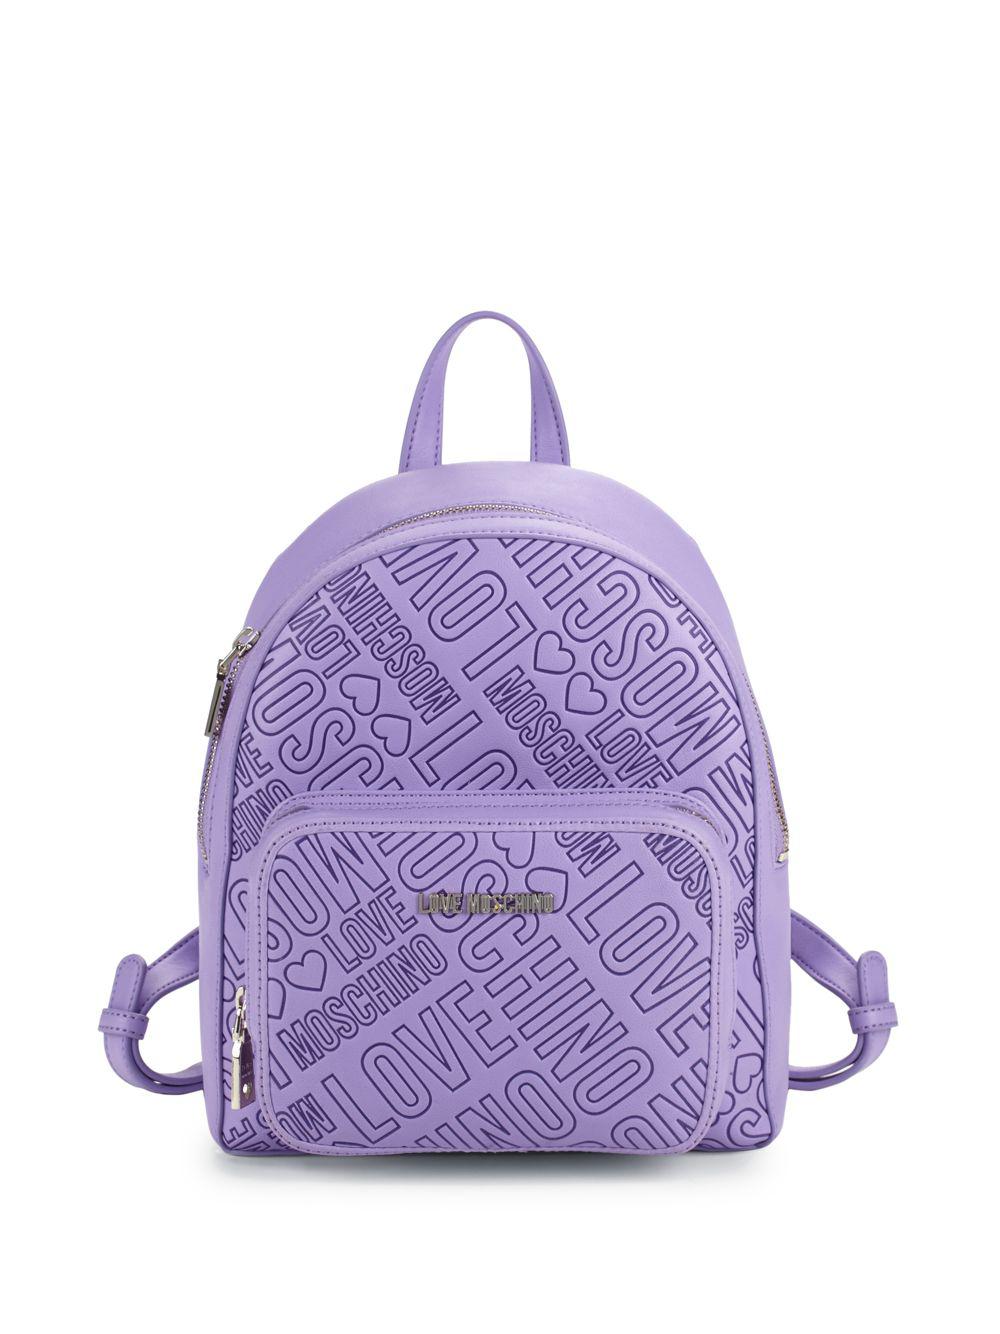 LOVE MOSCHINO WOMAN BACKPACK EMBOSSED 